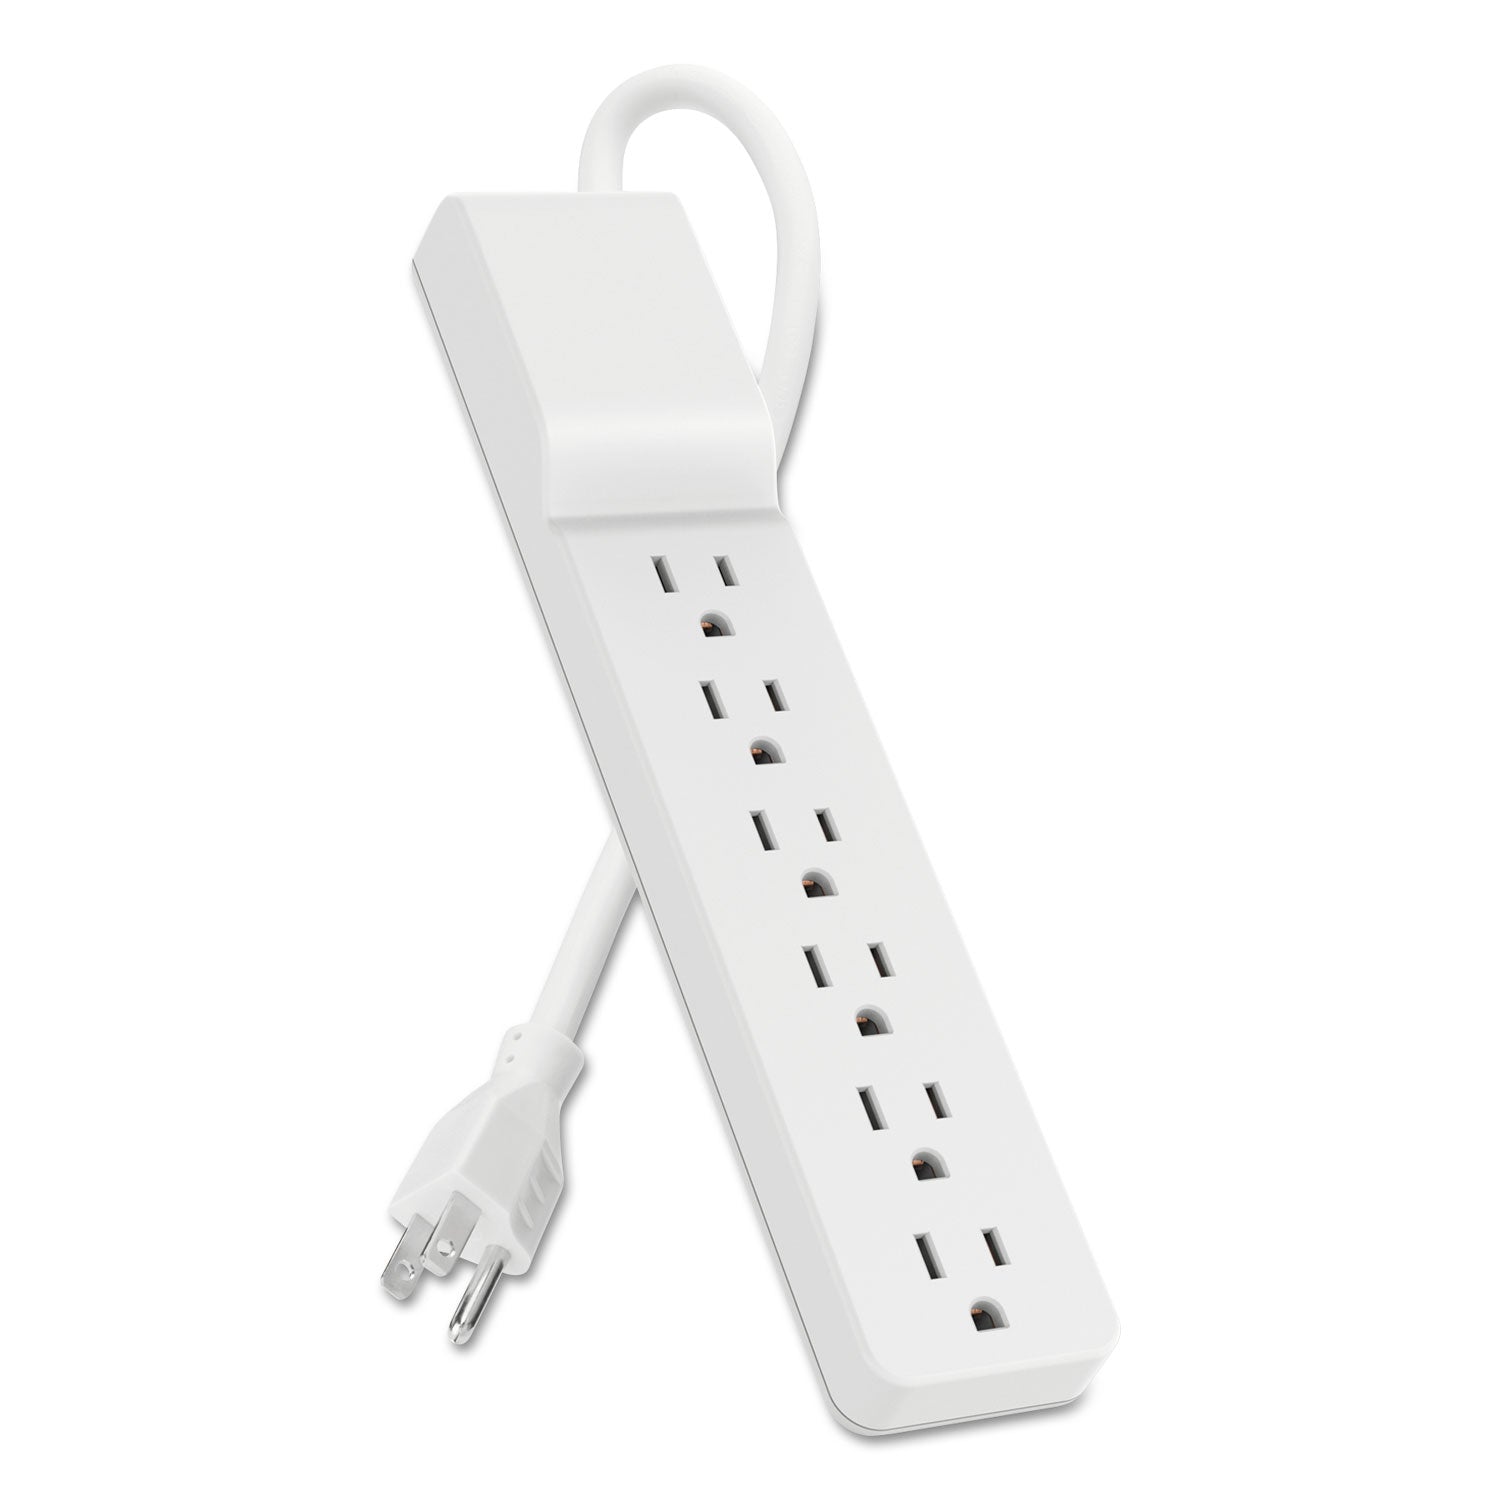 home-office-surge-protector-6-ac-outlets-10-ft-cord-720-j-white_blkbe10600010 - 2